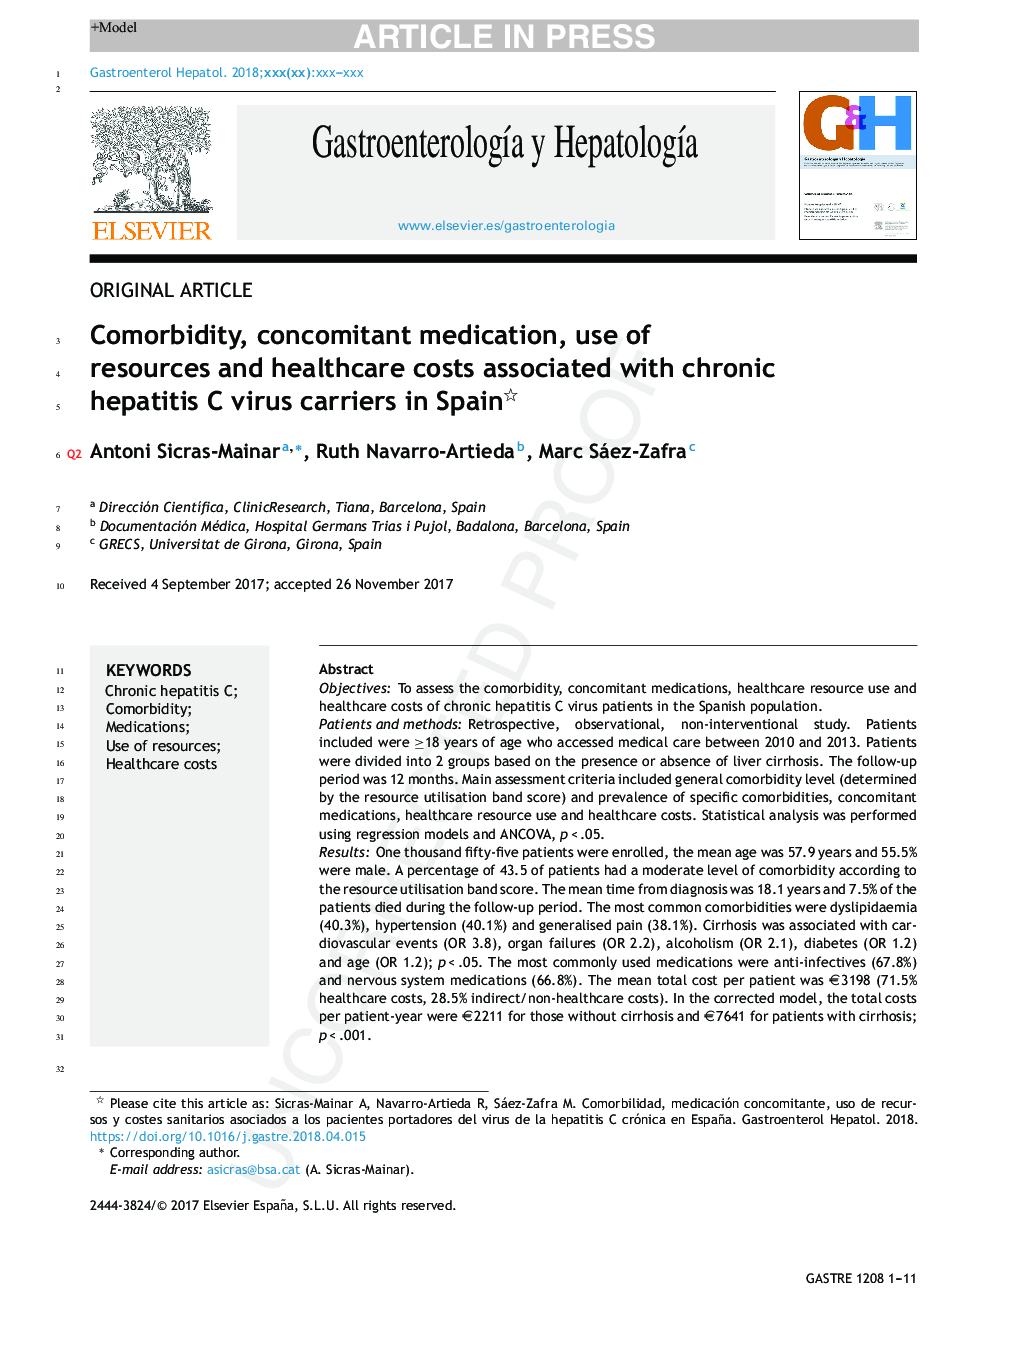 Comorbidity, concomitant medication, use of resources and healthcare costs associated with chronic hepatitis C virus carriers in Spain